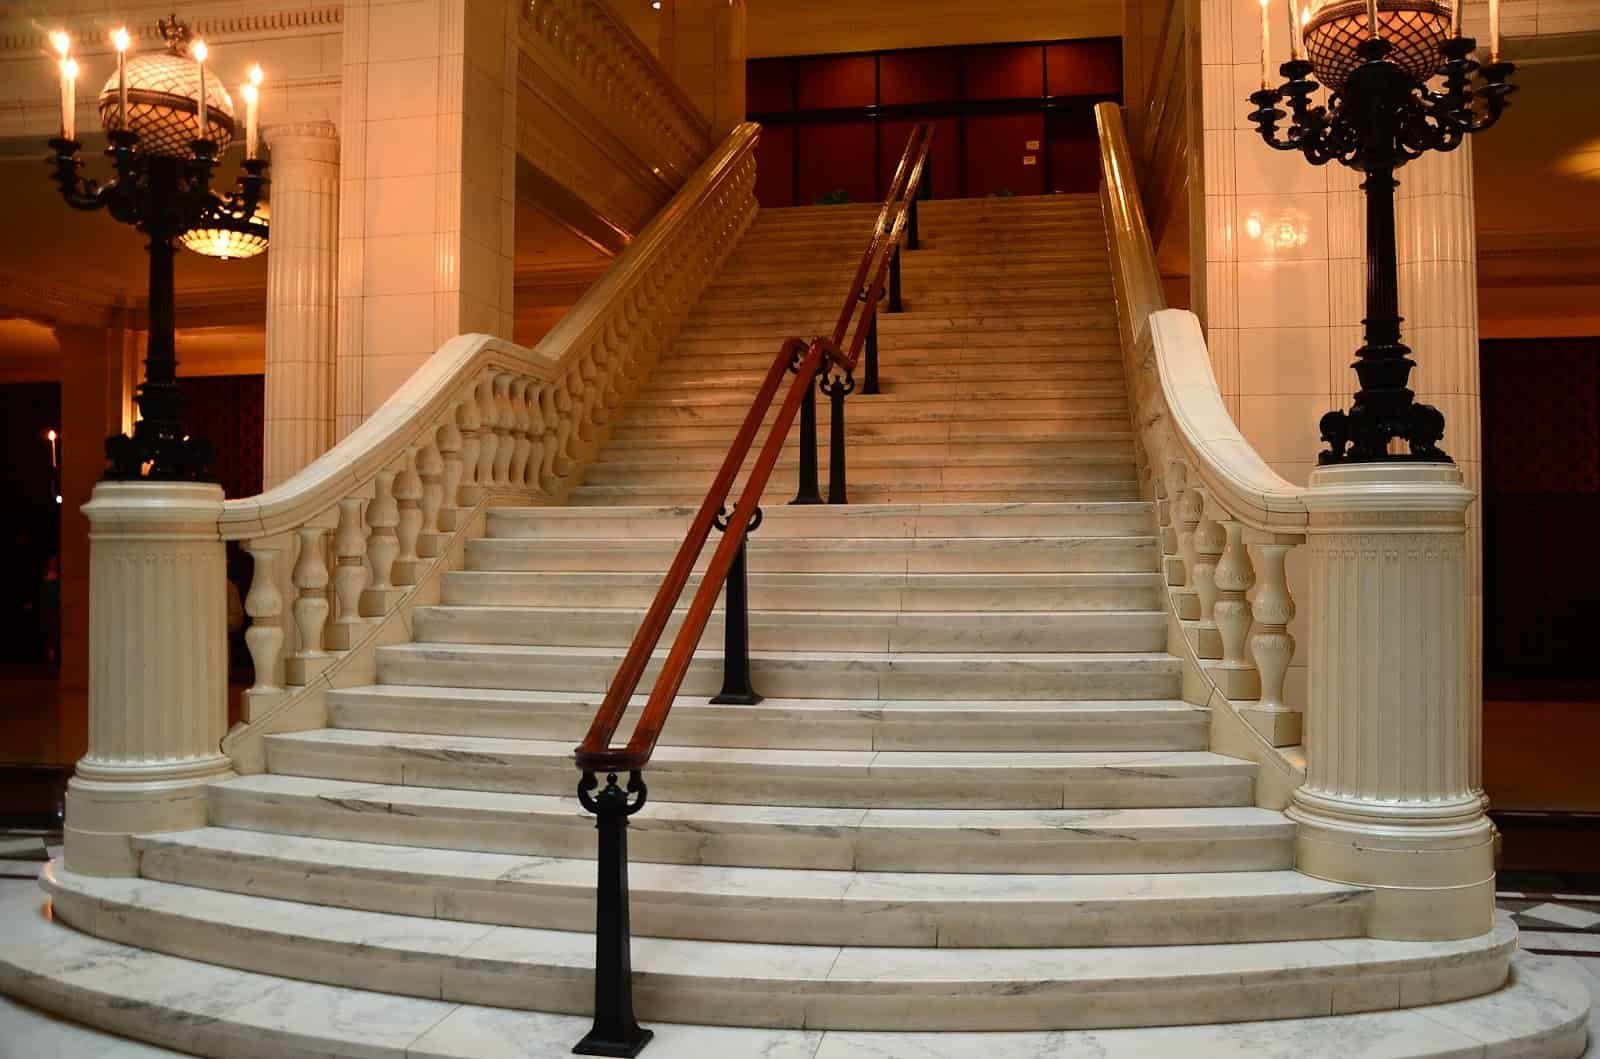 Staircase of the Santa Fe Building in Chicago